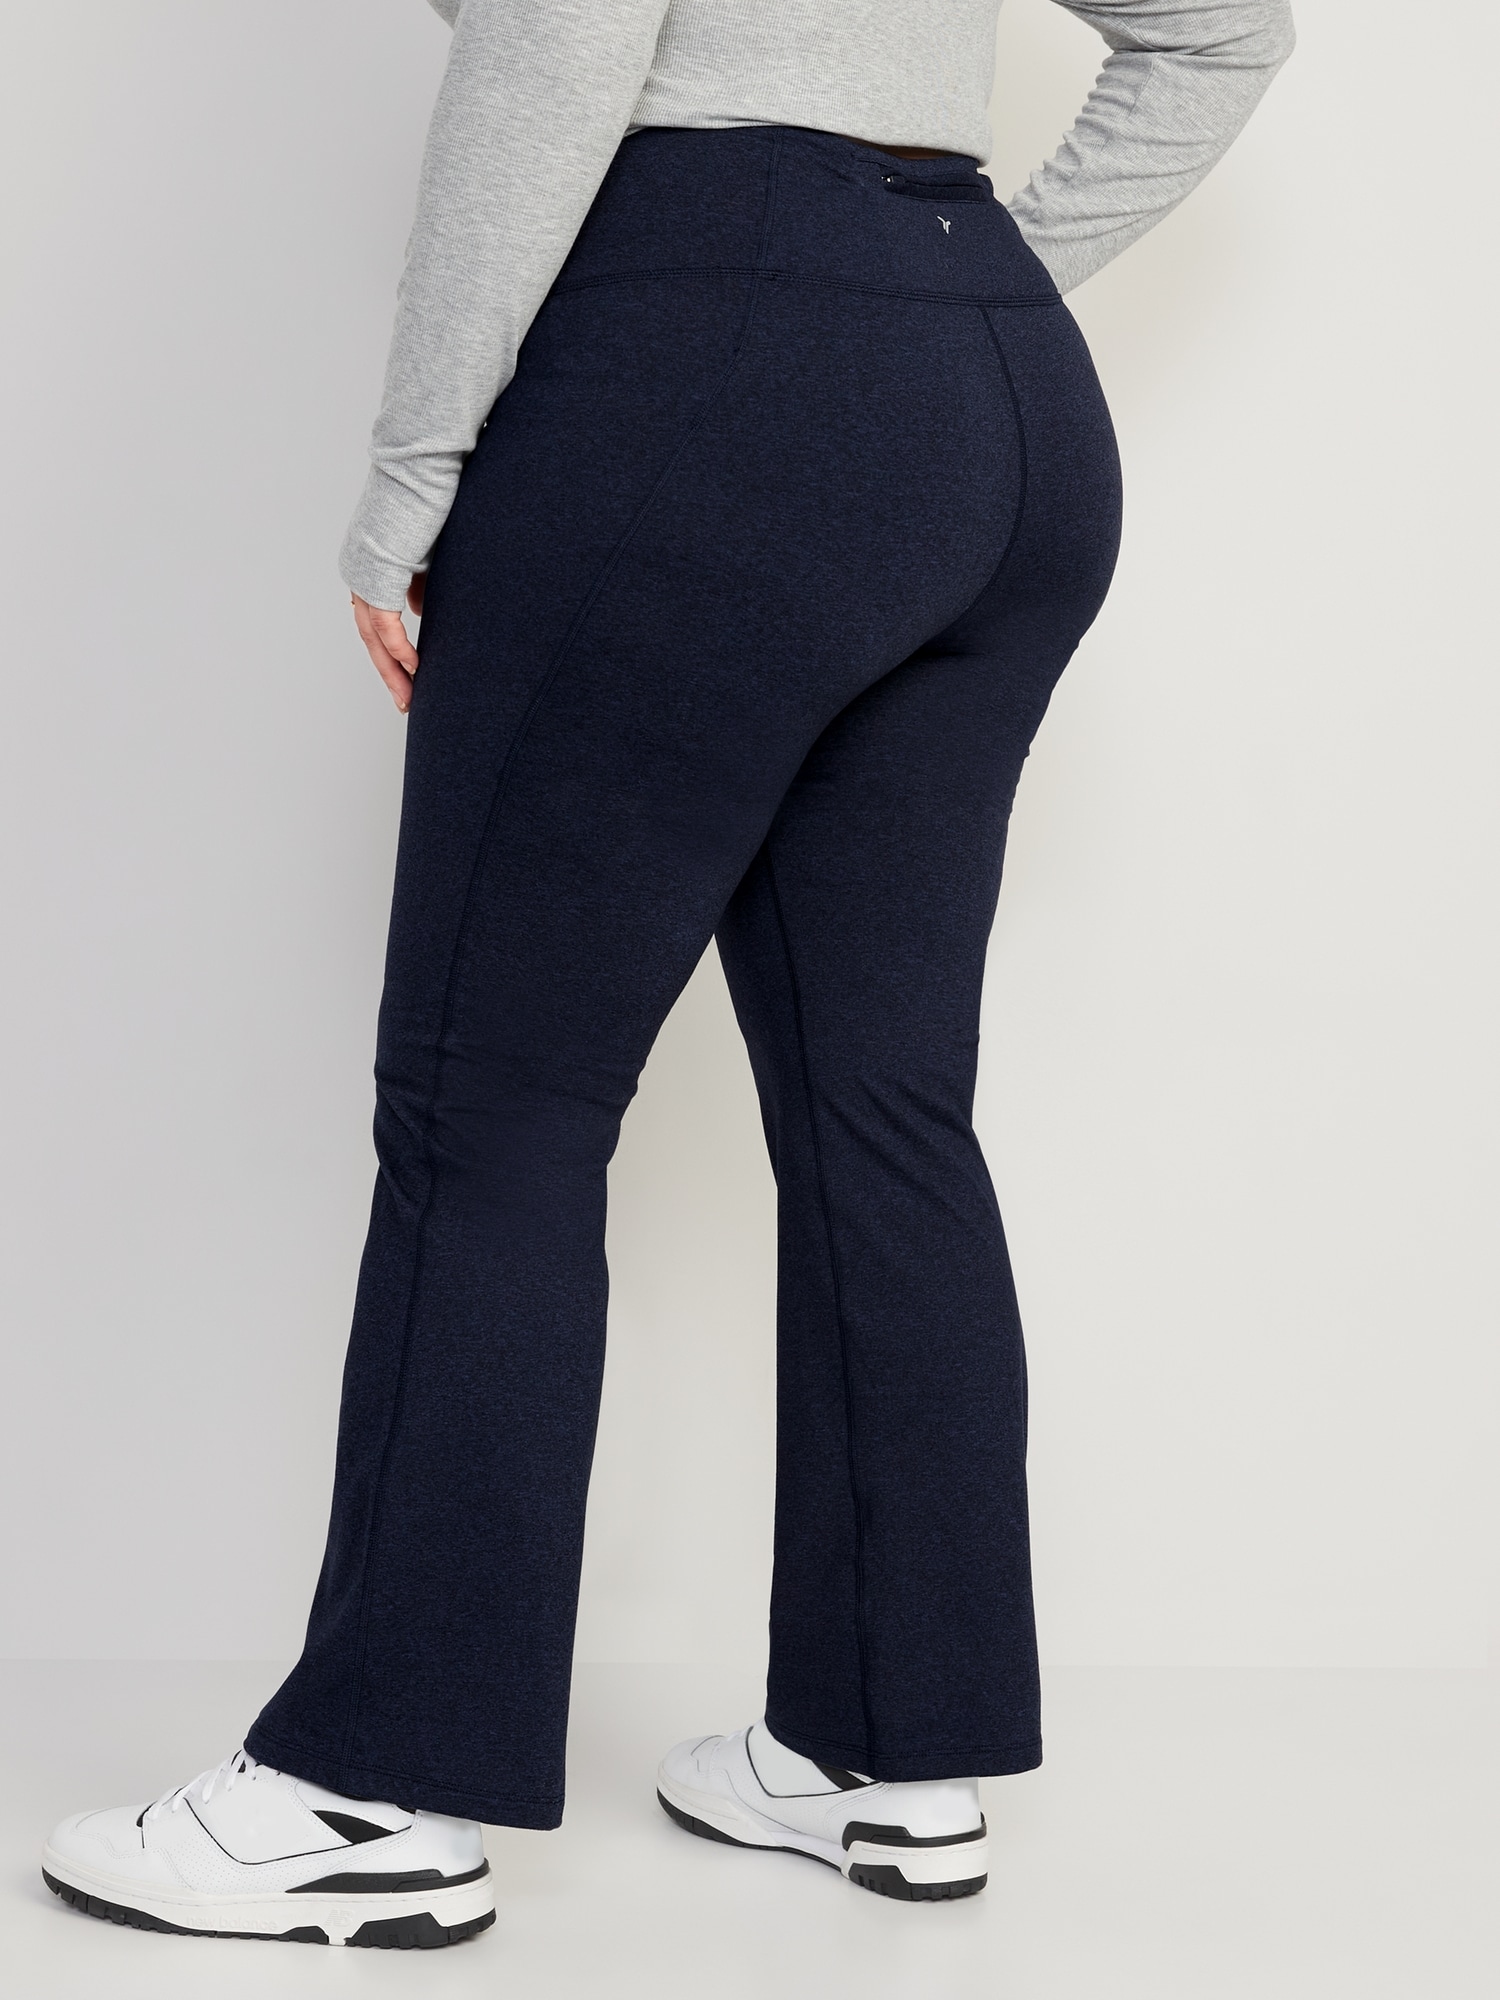 High-Waisted CozeCore Boot-Cut Leggings